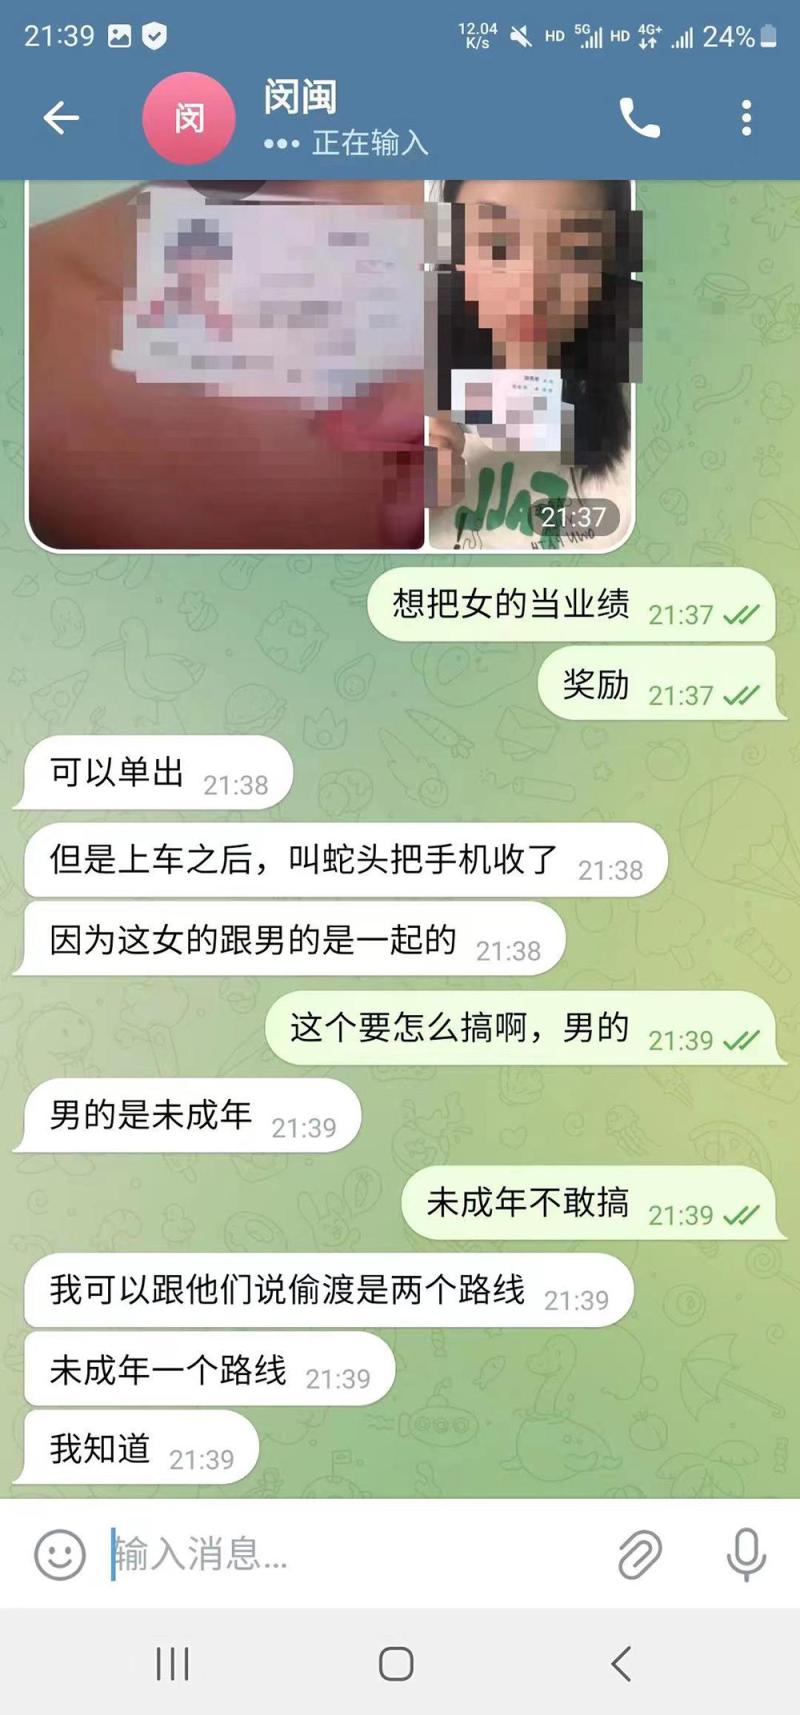 Anti fraud Center: Initiated investigation according to the procedure, a 22-year-old female college student from Baoshan, Yunnan is suspected to have been scammed to overseas college students | Social | Anti fraud